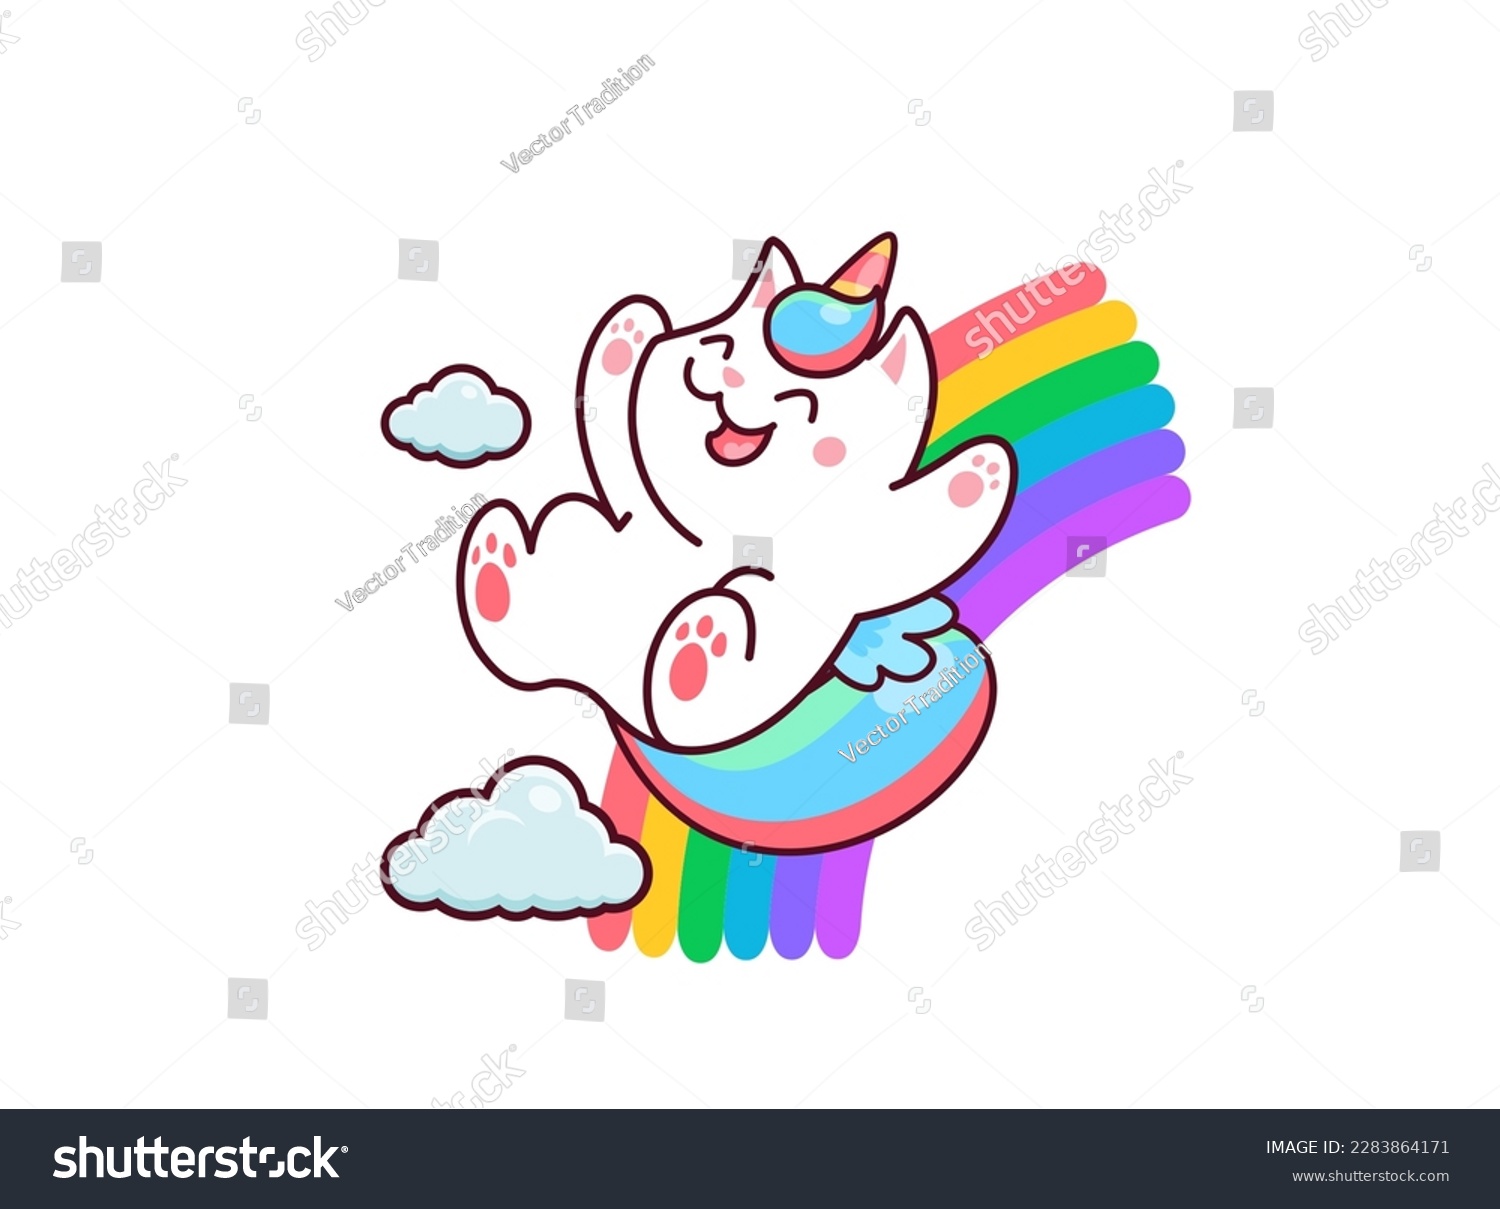 SVG of Cartoon cute kawaii caticorn character riding on rainbow. Magic creature of unicorn cat or kitty vector personage with rainbow horn and tail. Happy caticorn pet animal playing in sky with cloud svg